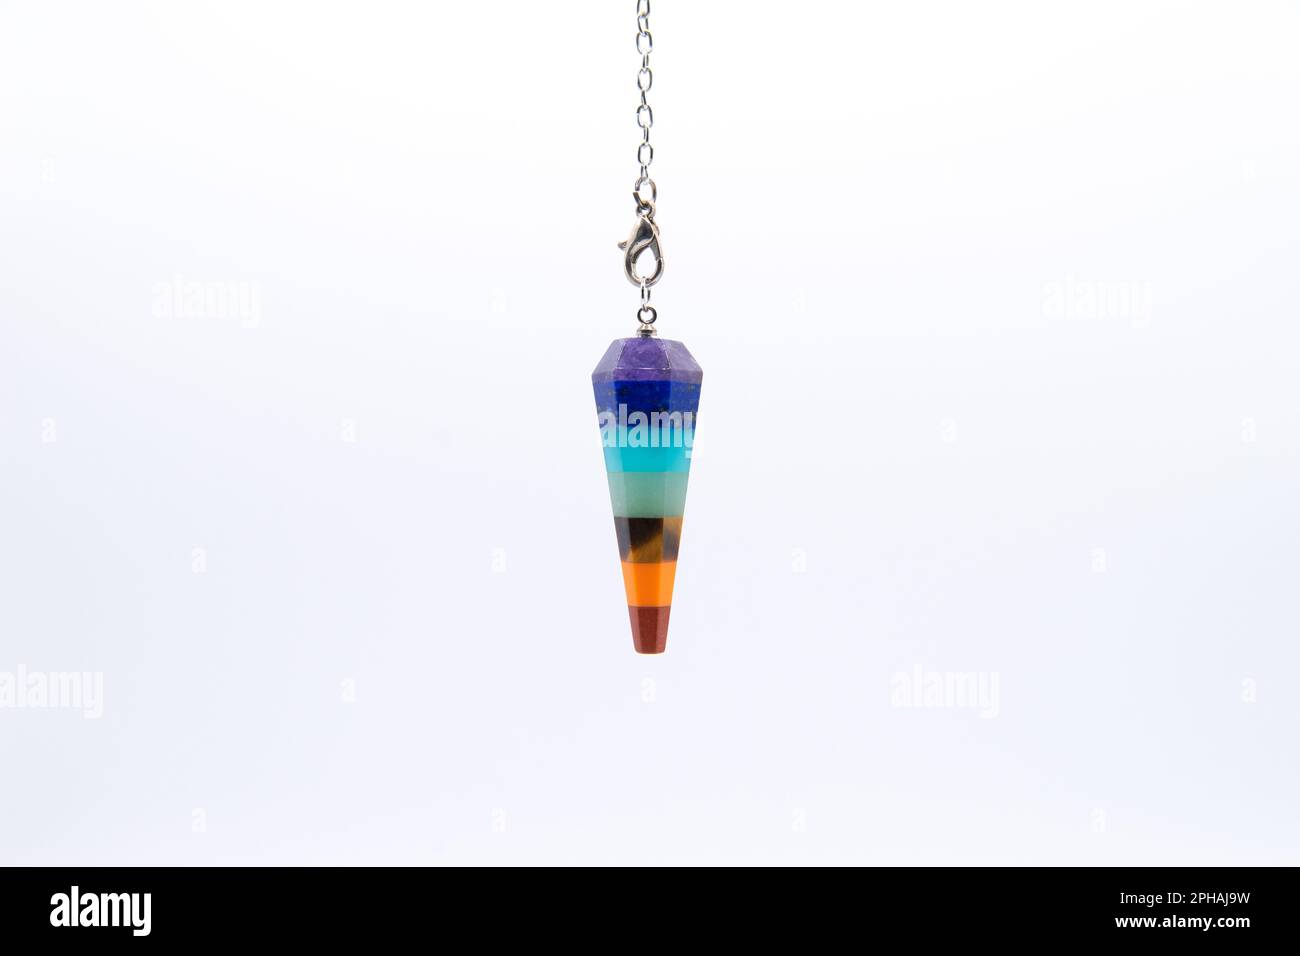 Seven Chakra color crystal pendulum on chain isolated on white background. Stock Photo